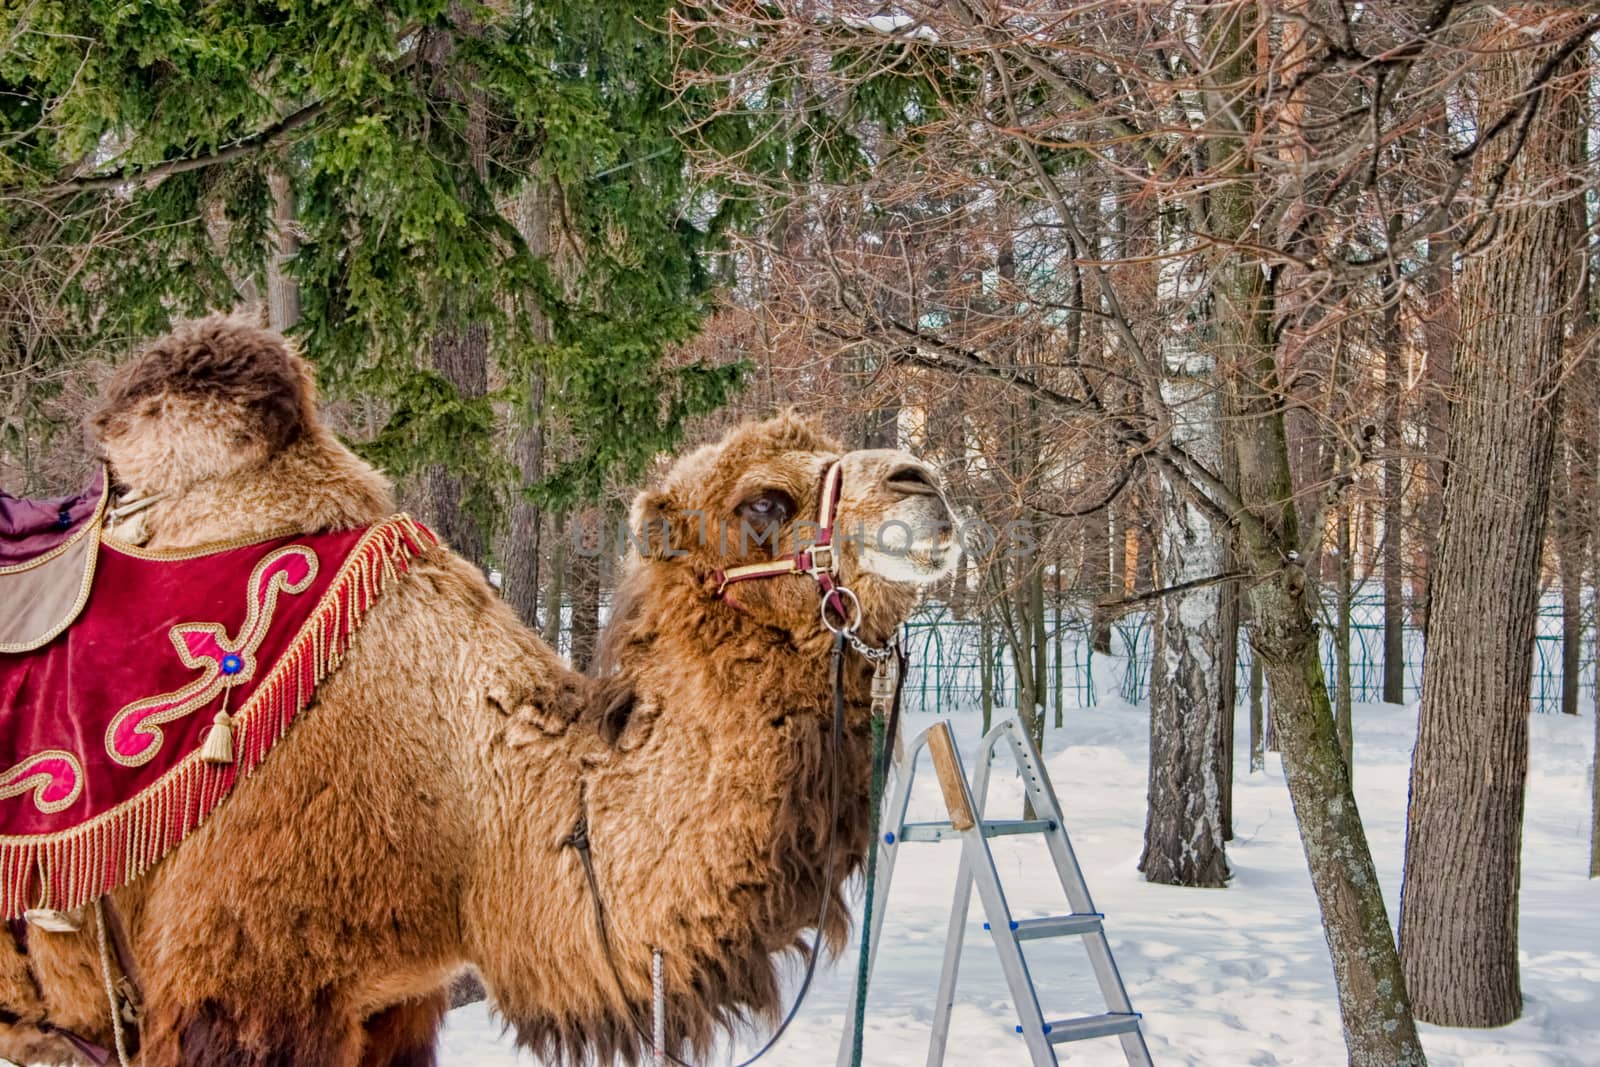 The cold winter is not an obstacle for riding a camel and to enjoy the beauty of local firs and buildings! Tere is a ladder near the camel to climb up on it more comfortable!
By the way, do you know that a camel can drink up near 200 litres of water in one time and can not drink at all for a long time!